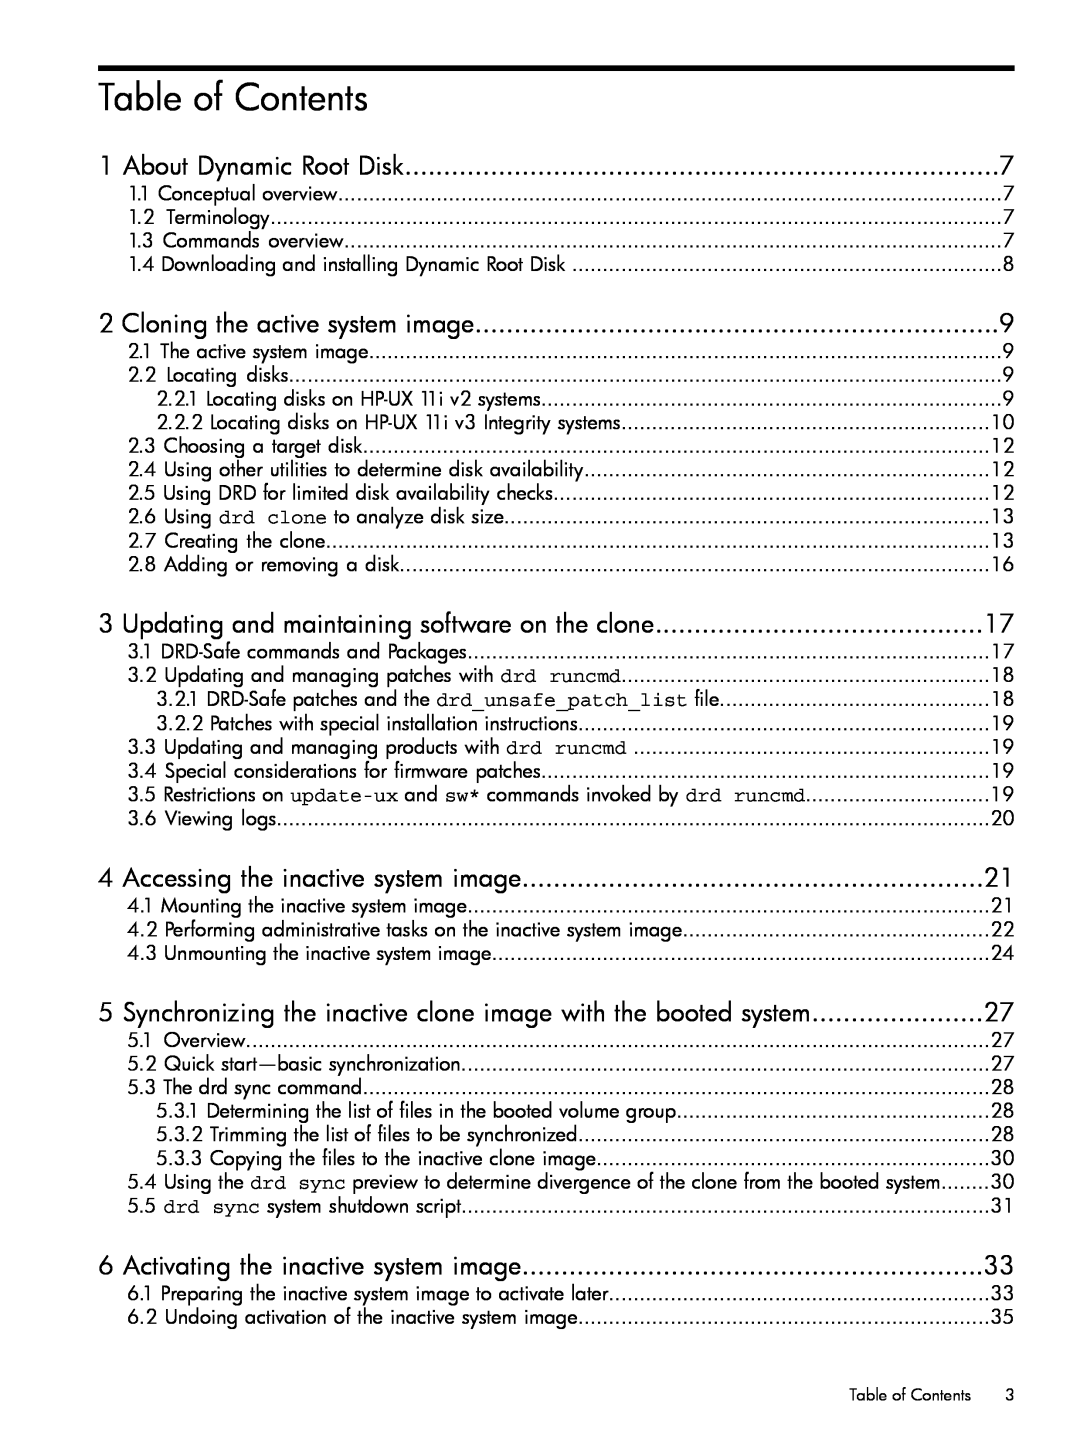 HP Dynamic Root Disk (DRD) manual Table of Contents, About Dynamic Root Disk, Cloning the active system image 